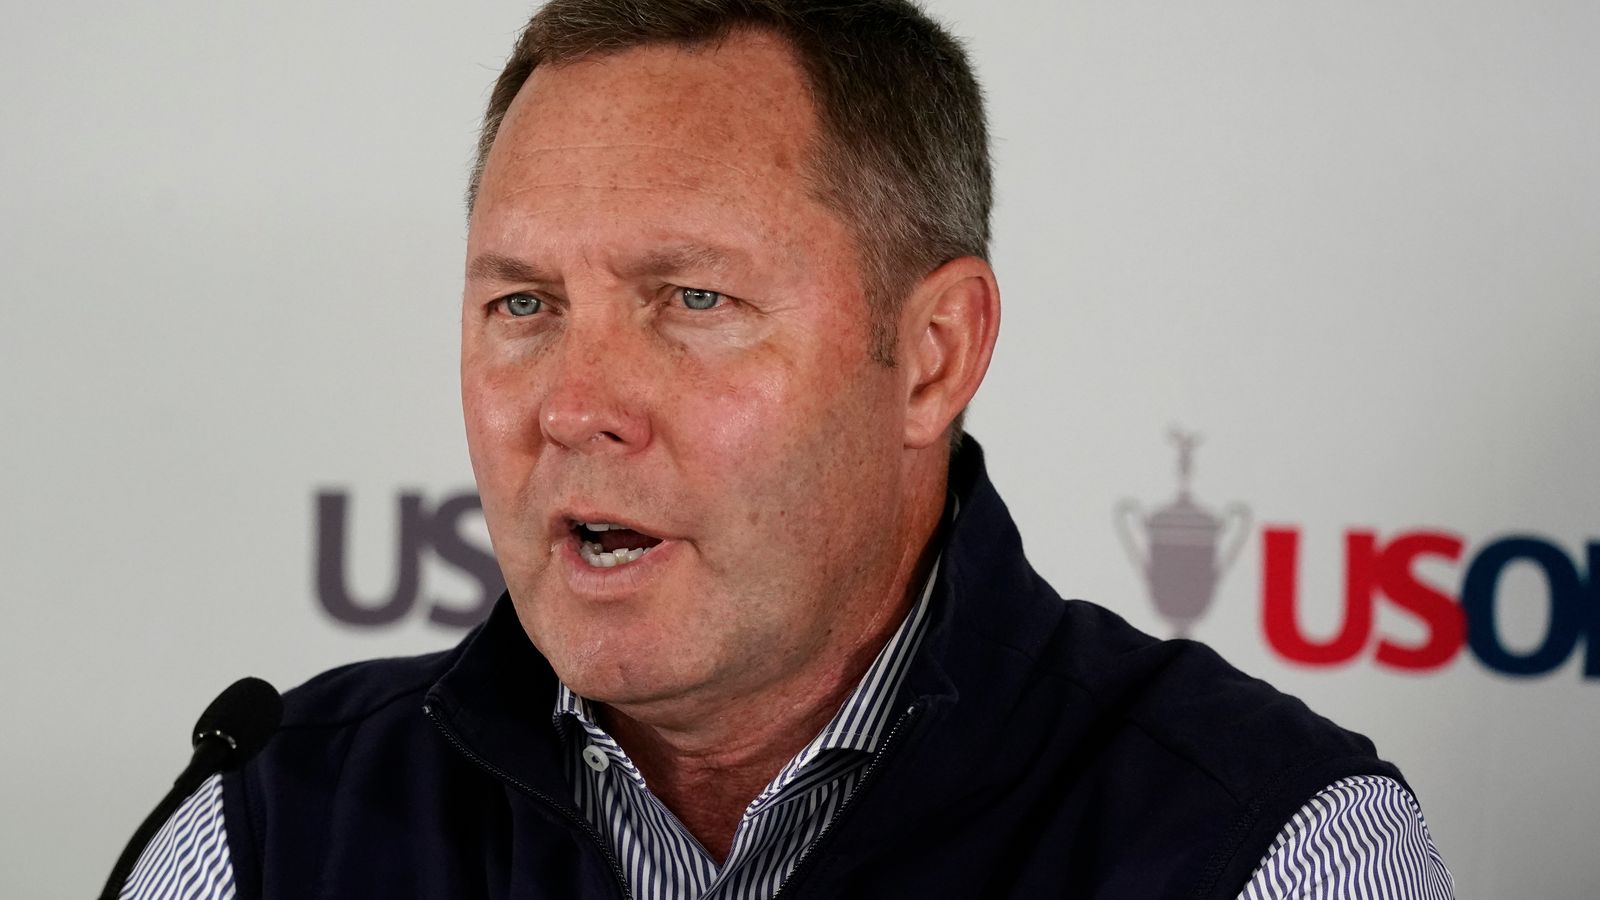 US Open: USGA’s Mike Whan warns it may become harder for LIV Golf players to feature in future